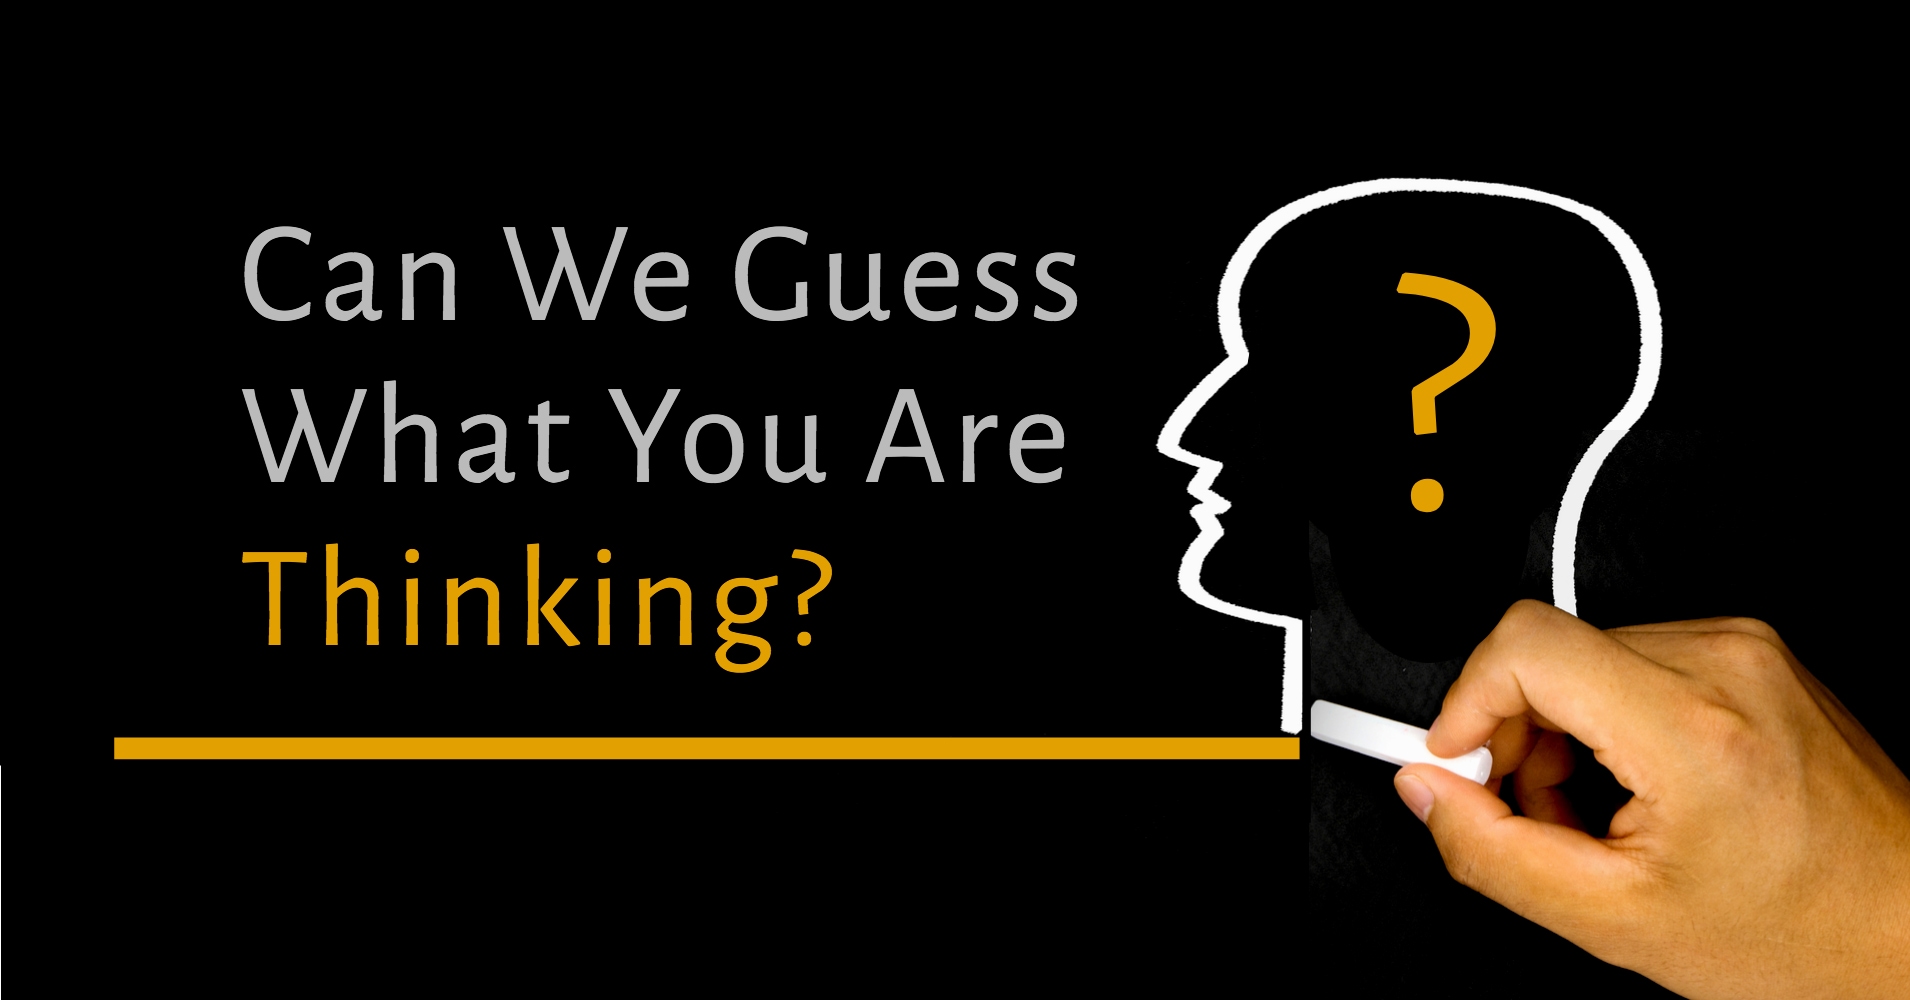 Can We Guess What Thinking? Quiz - Quizony.com